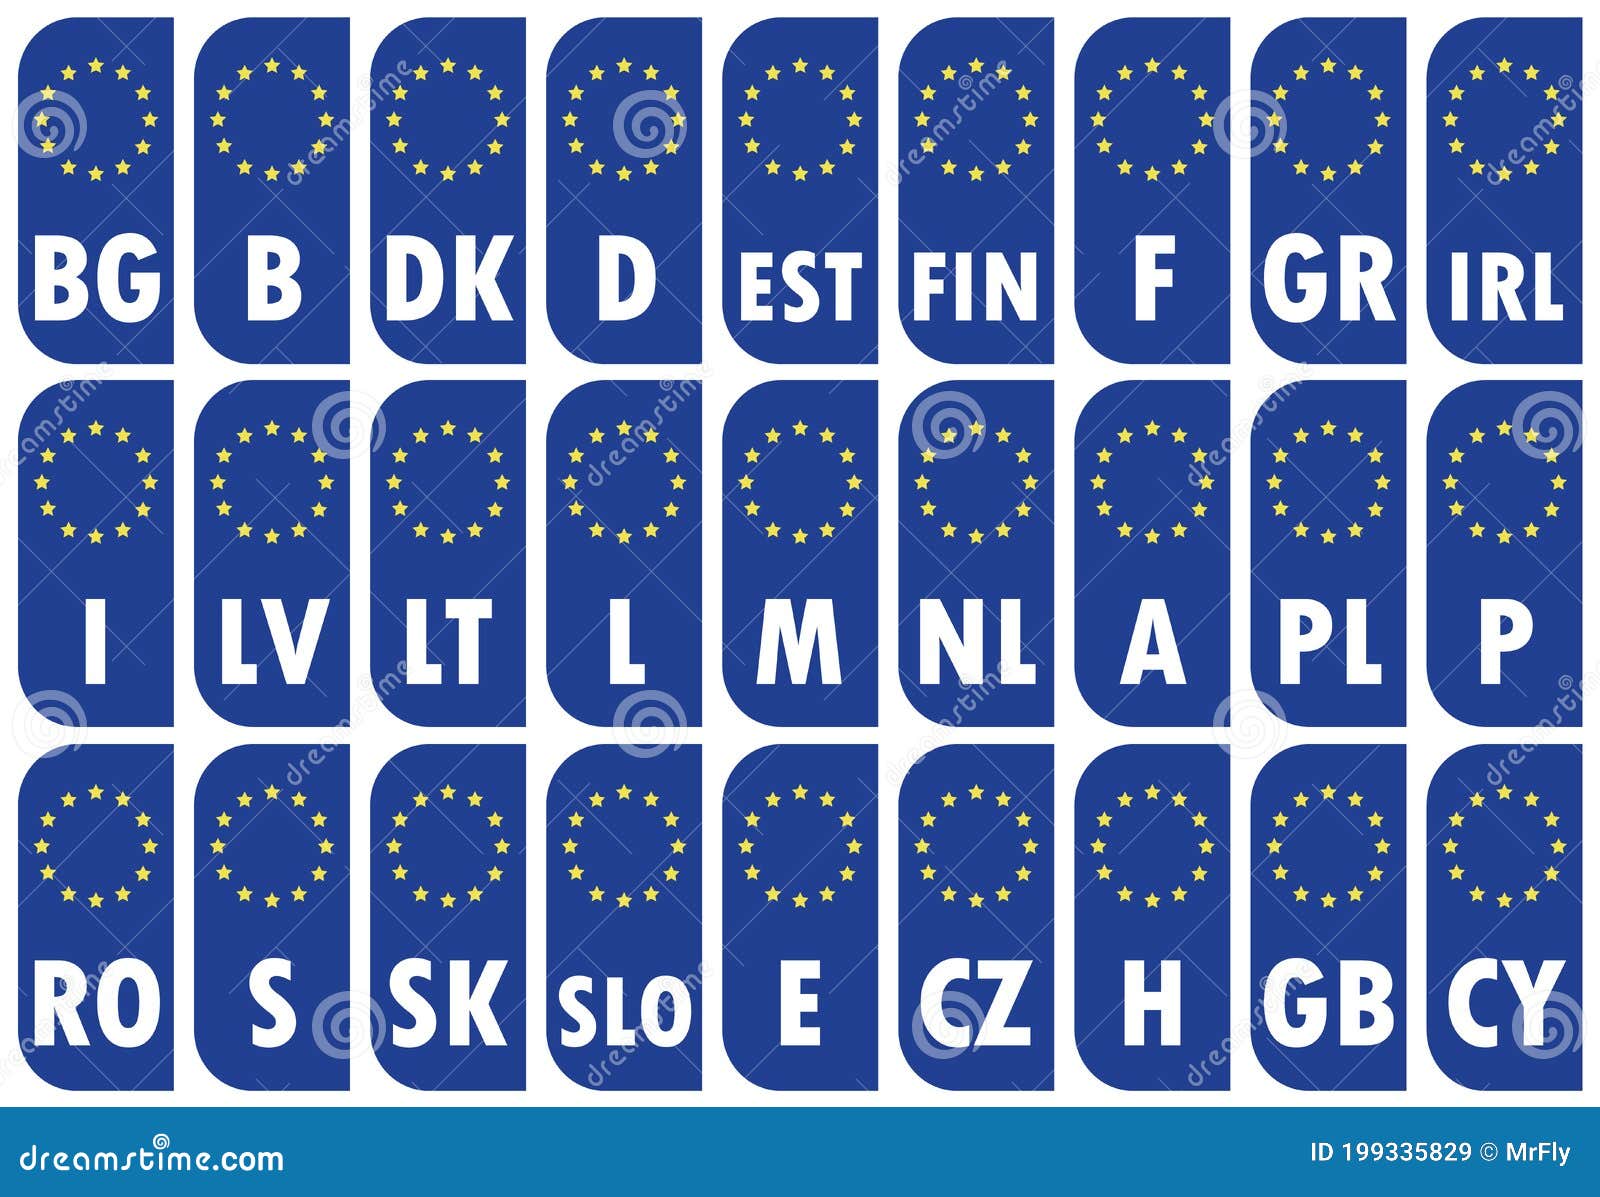 Rounded EU Number Plate Identification, 27 Member States, Vector